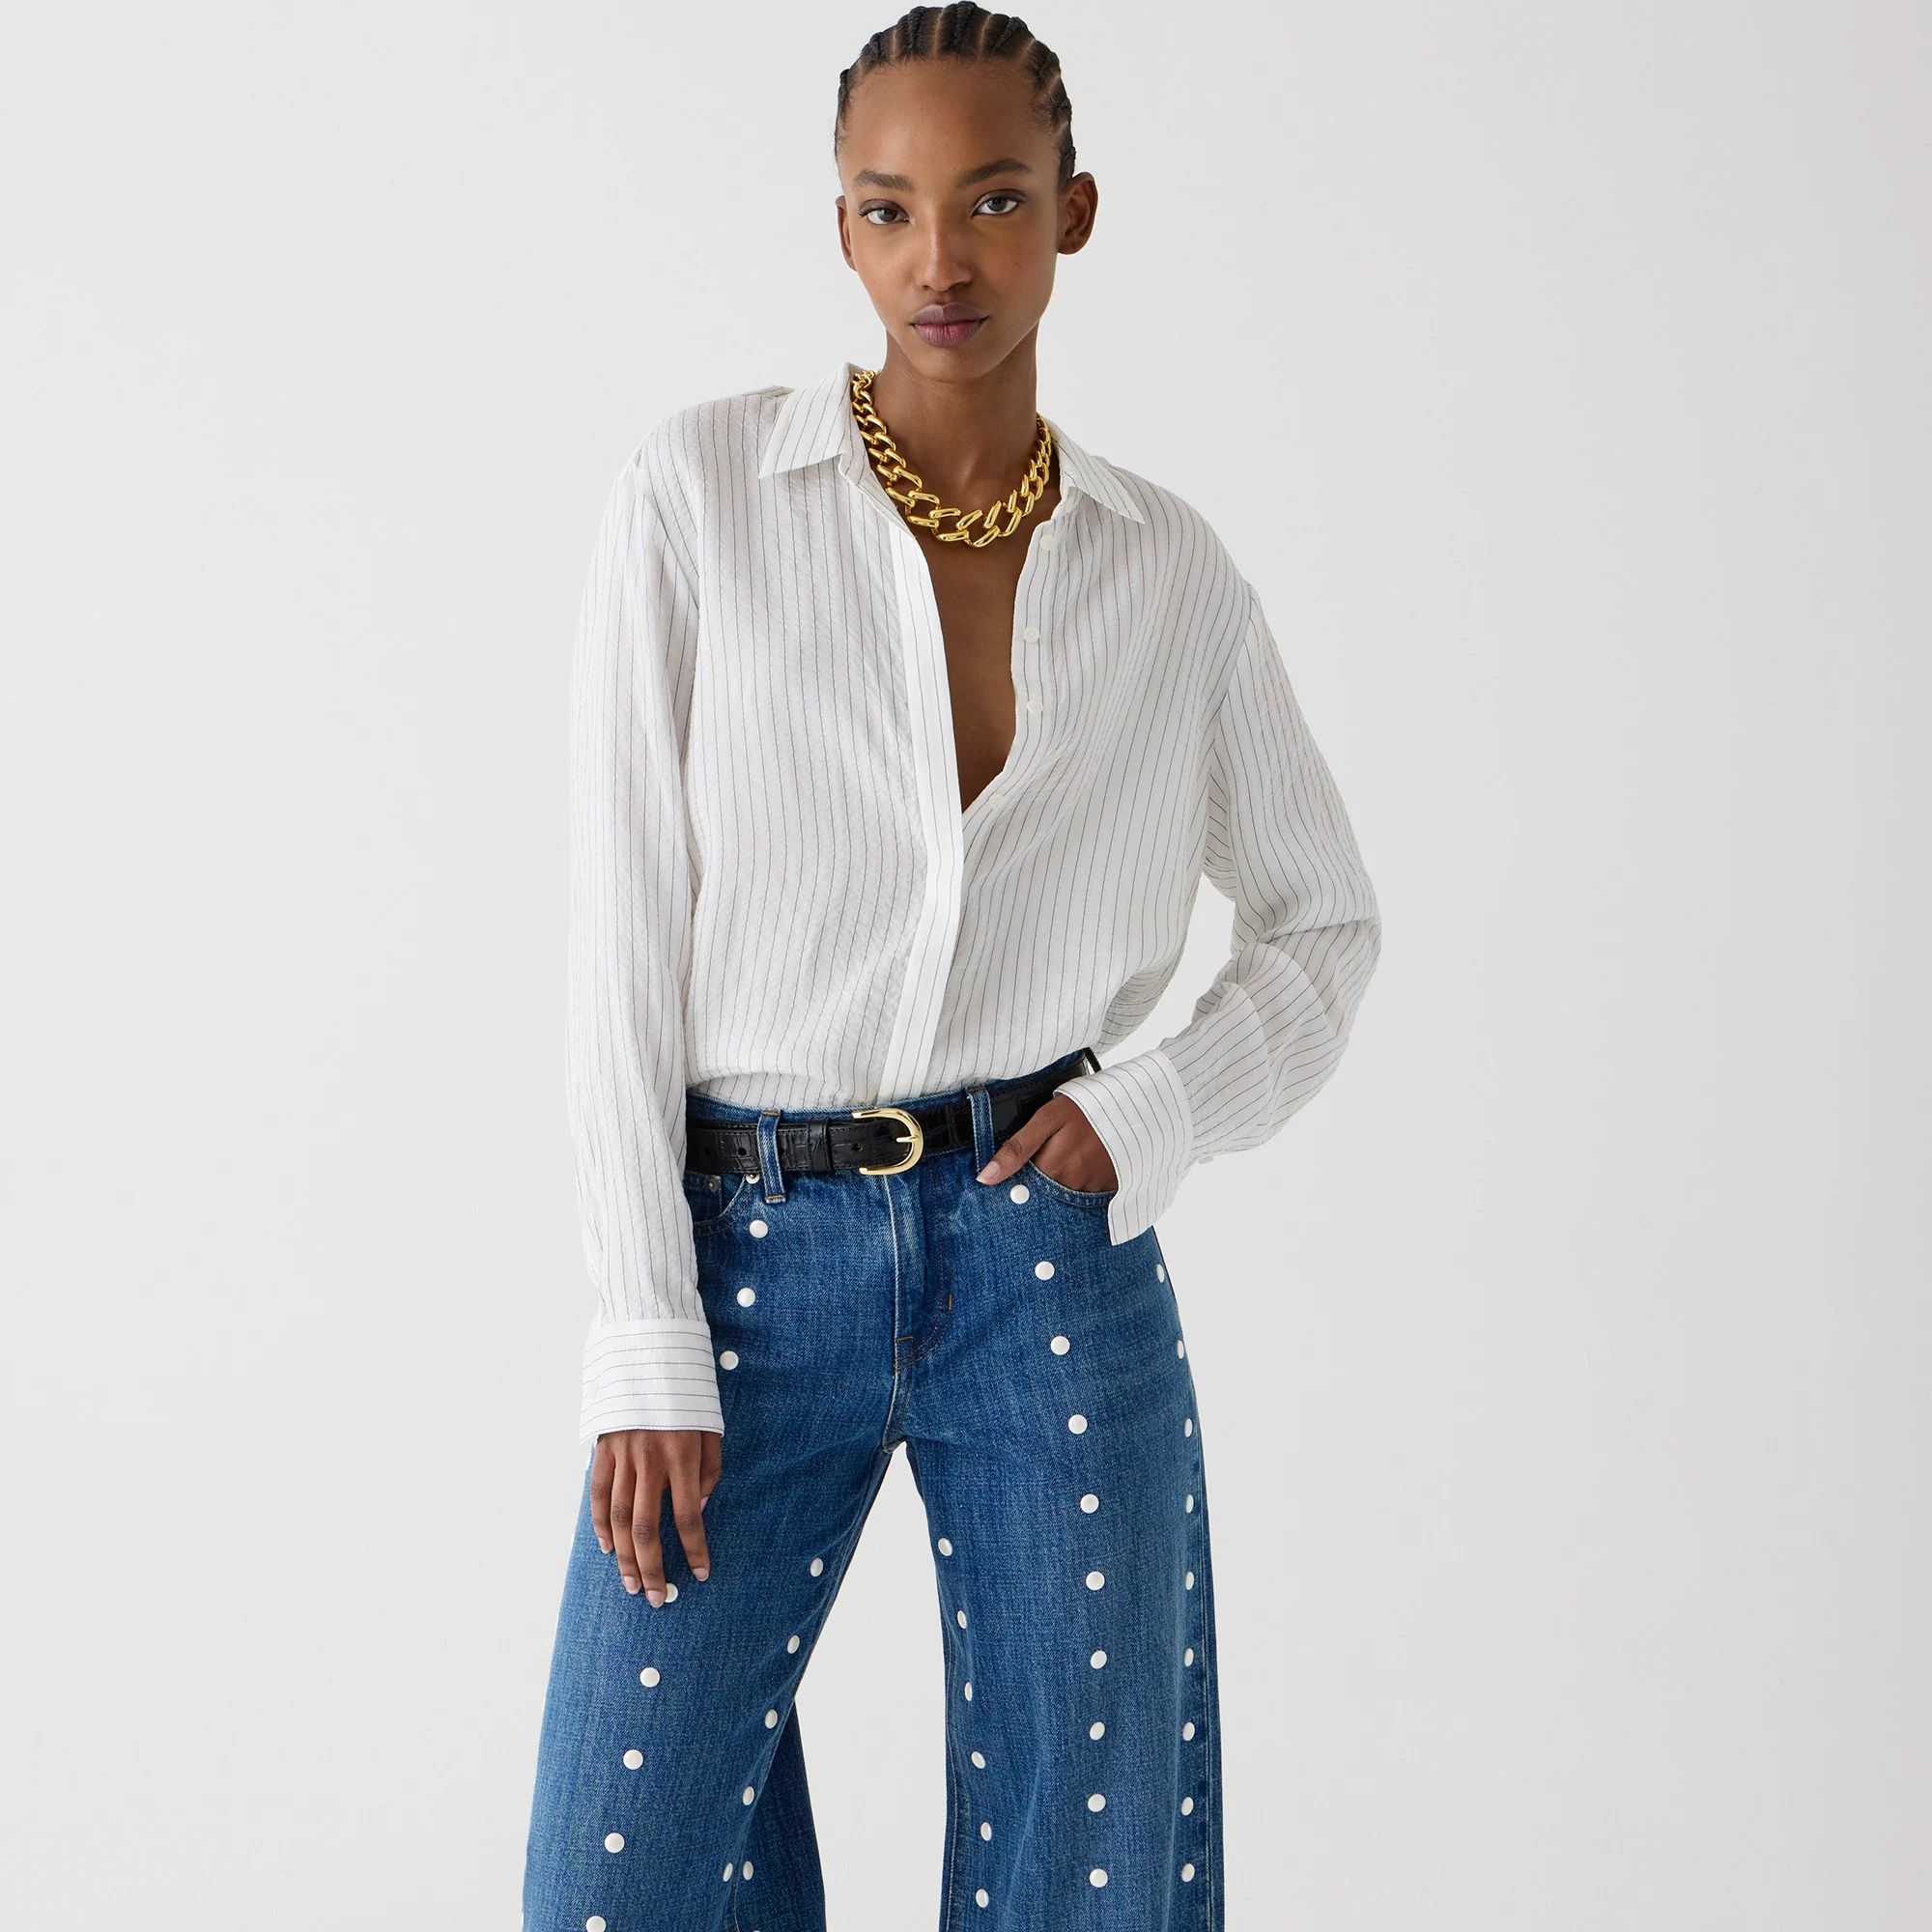 Lower-rise wide-leg jean with pearls | J.Crew US